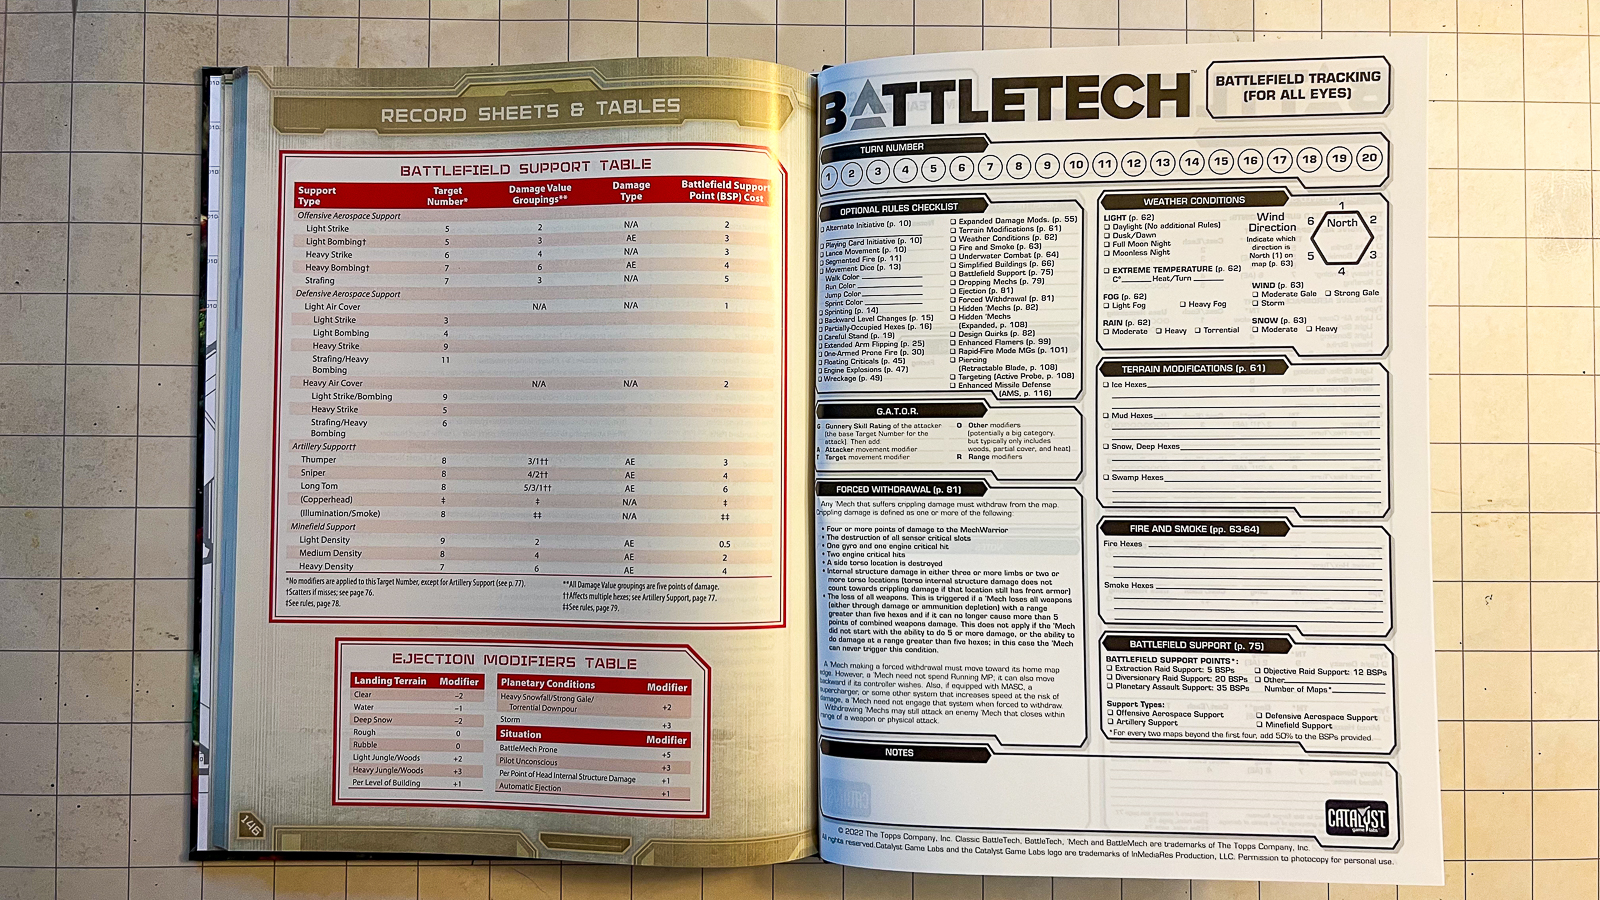 Reference table within the Battletech Mech Manual